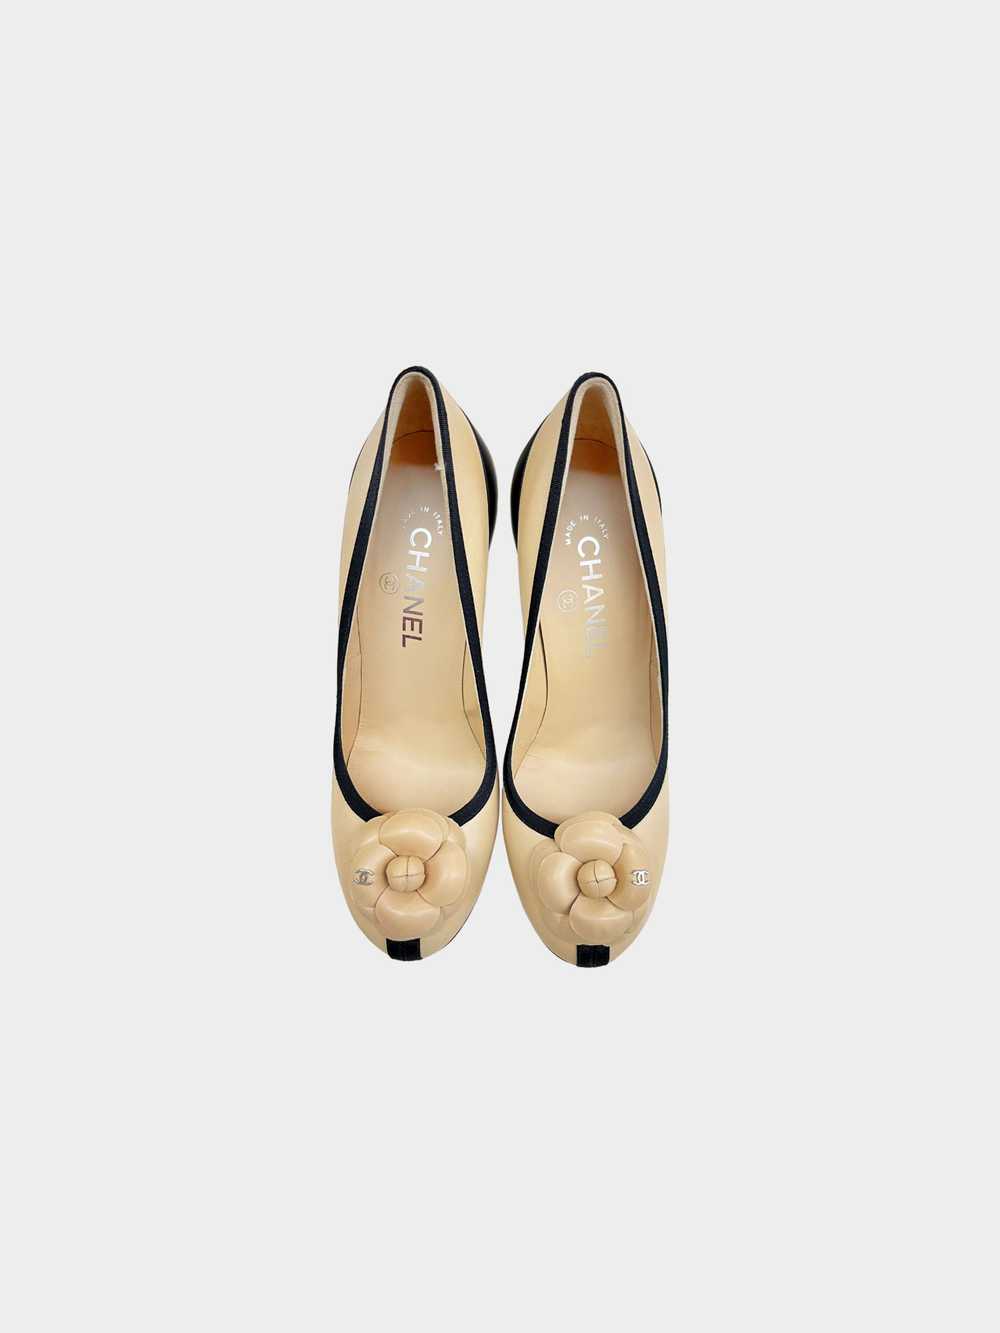 Chanel 2010s Two-toned Camellia Leather Pumps - image 2